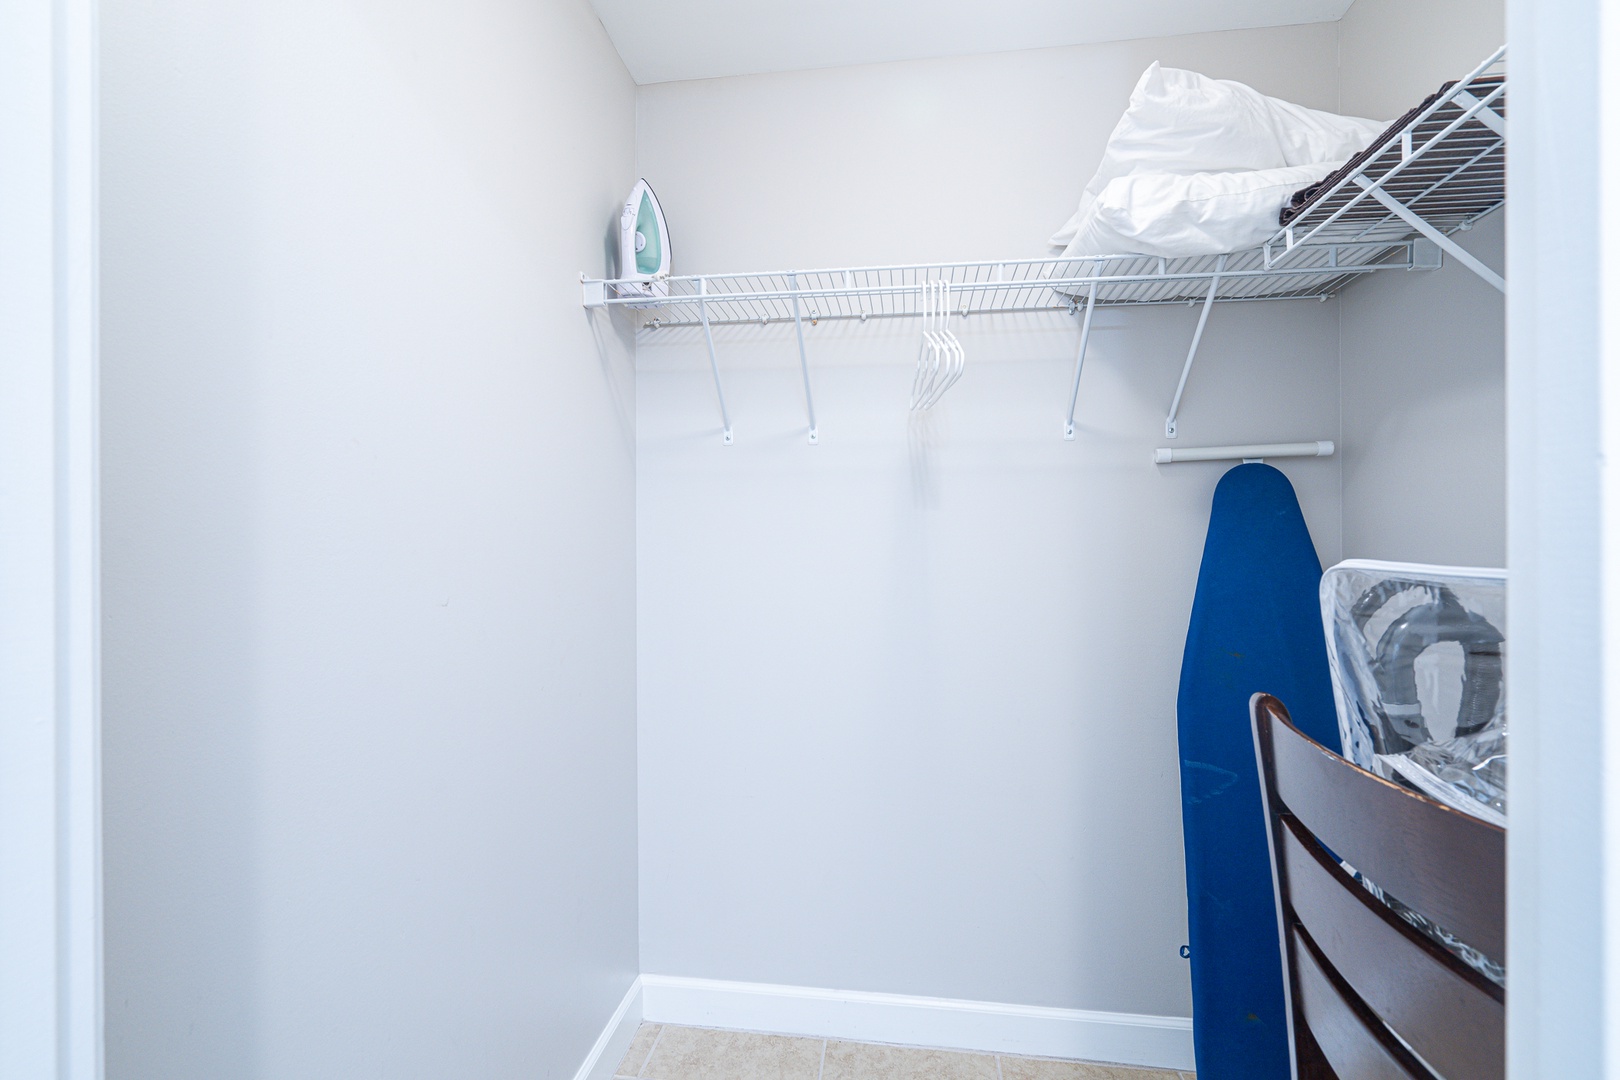 The master bedroom walk-in closet is perfect for organizing clothes & bags